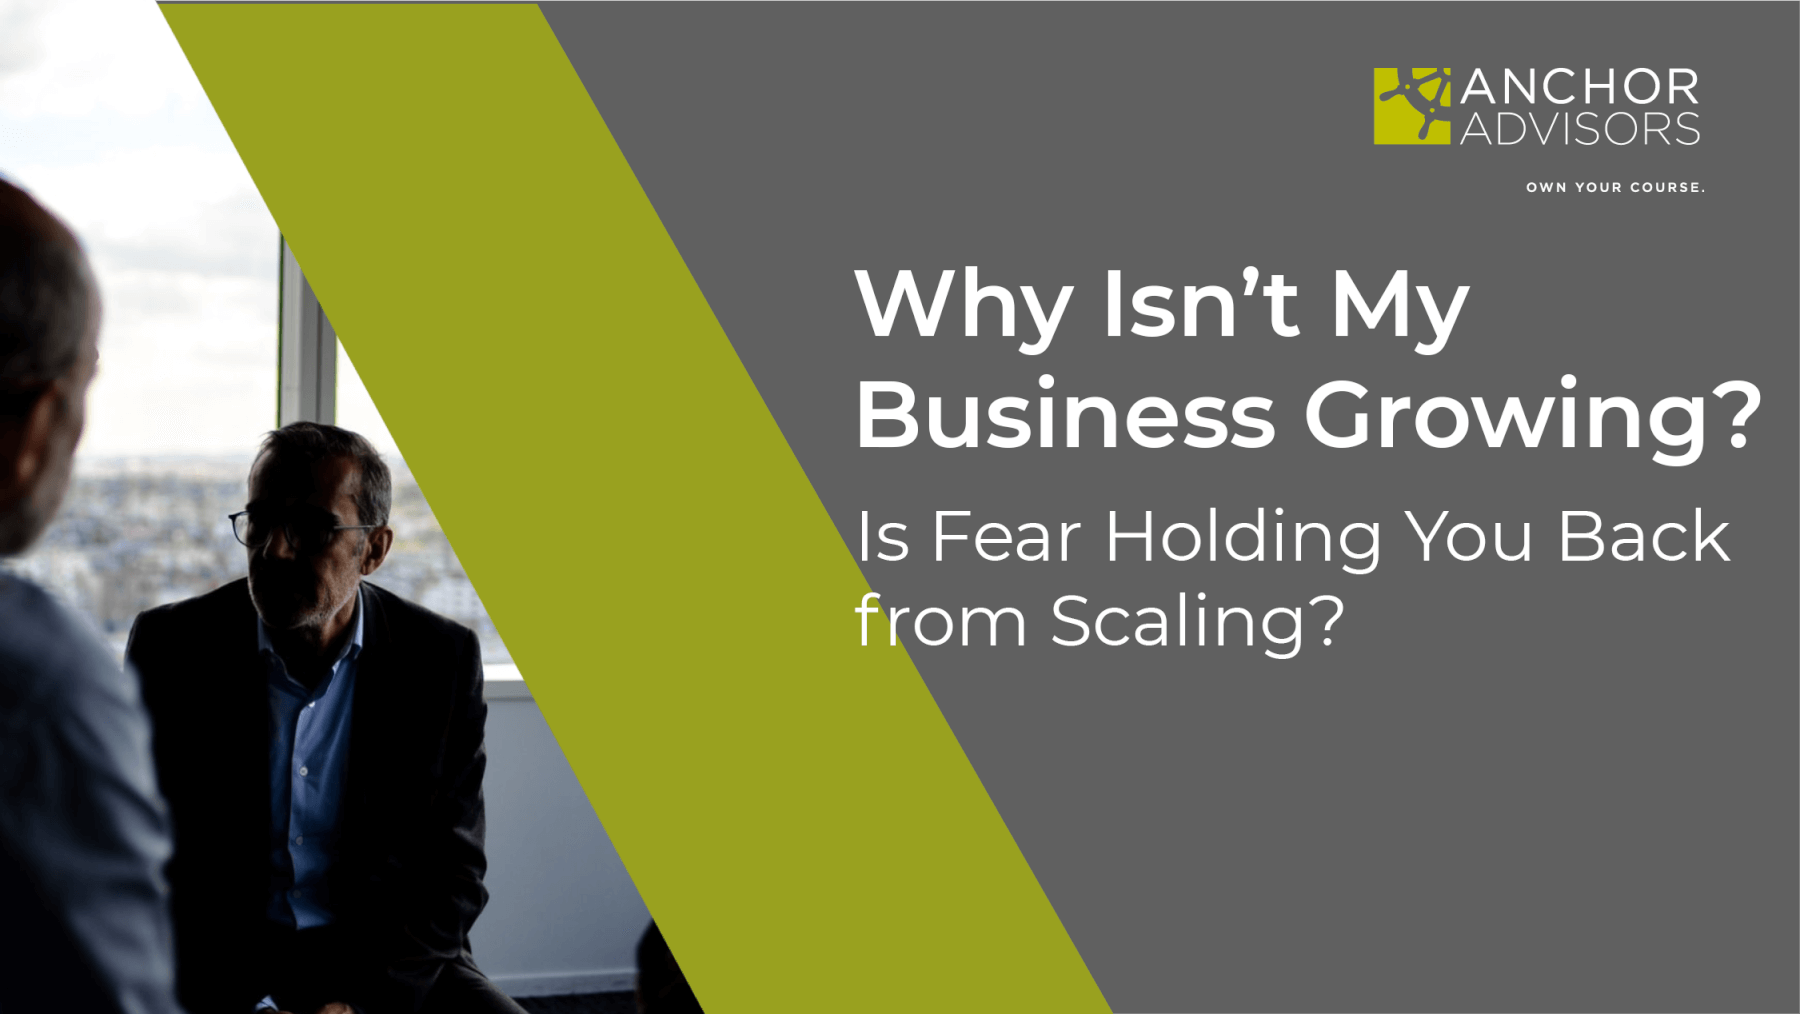 Why isn’t my business growing? If you are asking this question, we have the answer to why businesses stop growing. But you may be surprised what it is. Fear.